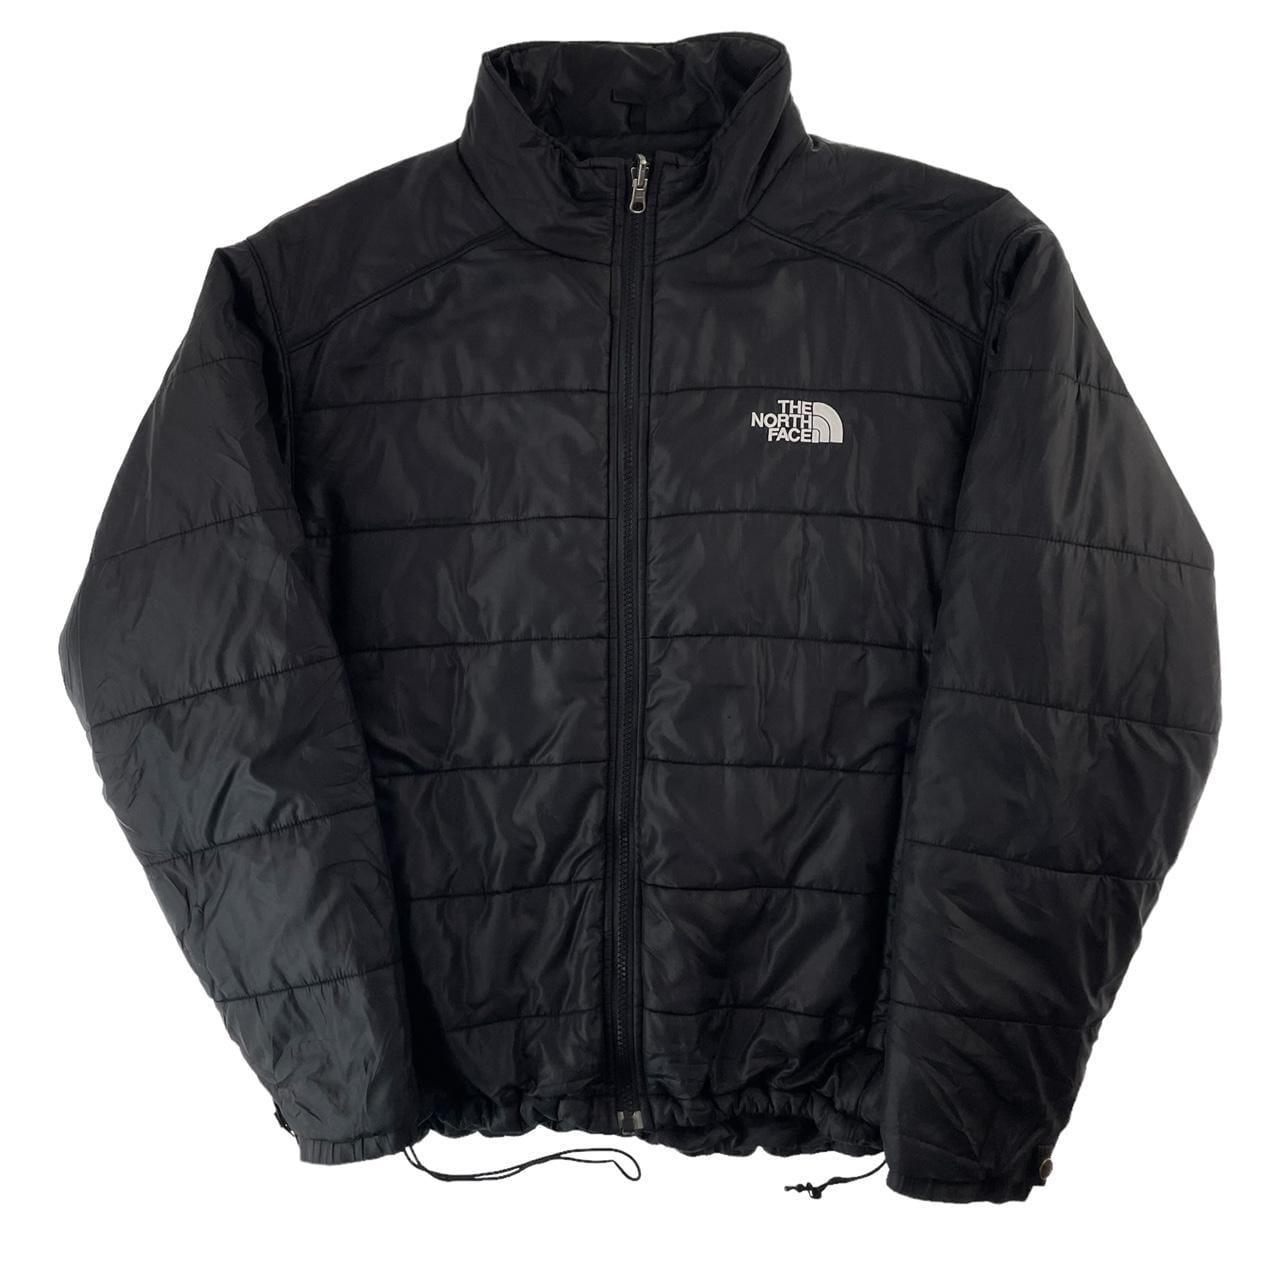 North Face padded jacket size M - Known Source